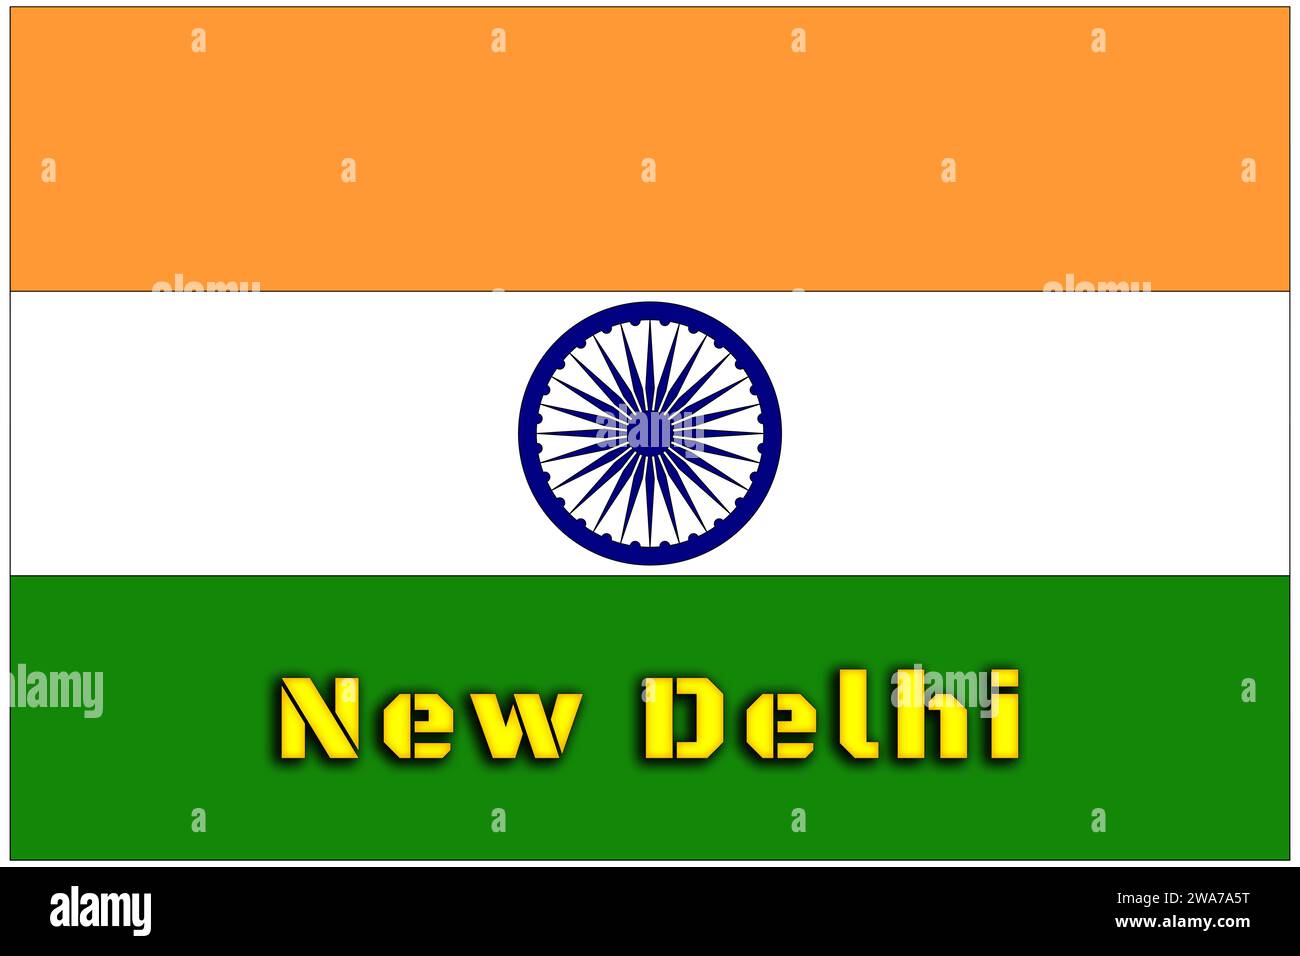 India, Indian flag with the name of the capital of New Delhi, the flag with the correct official proportions and colors. Stock Photo